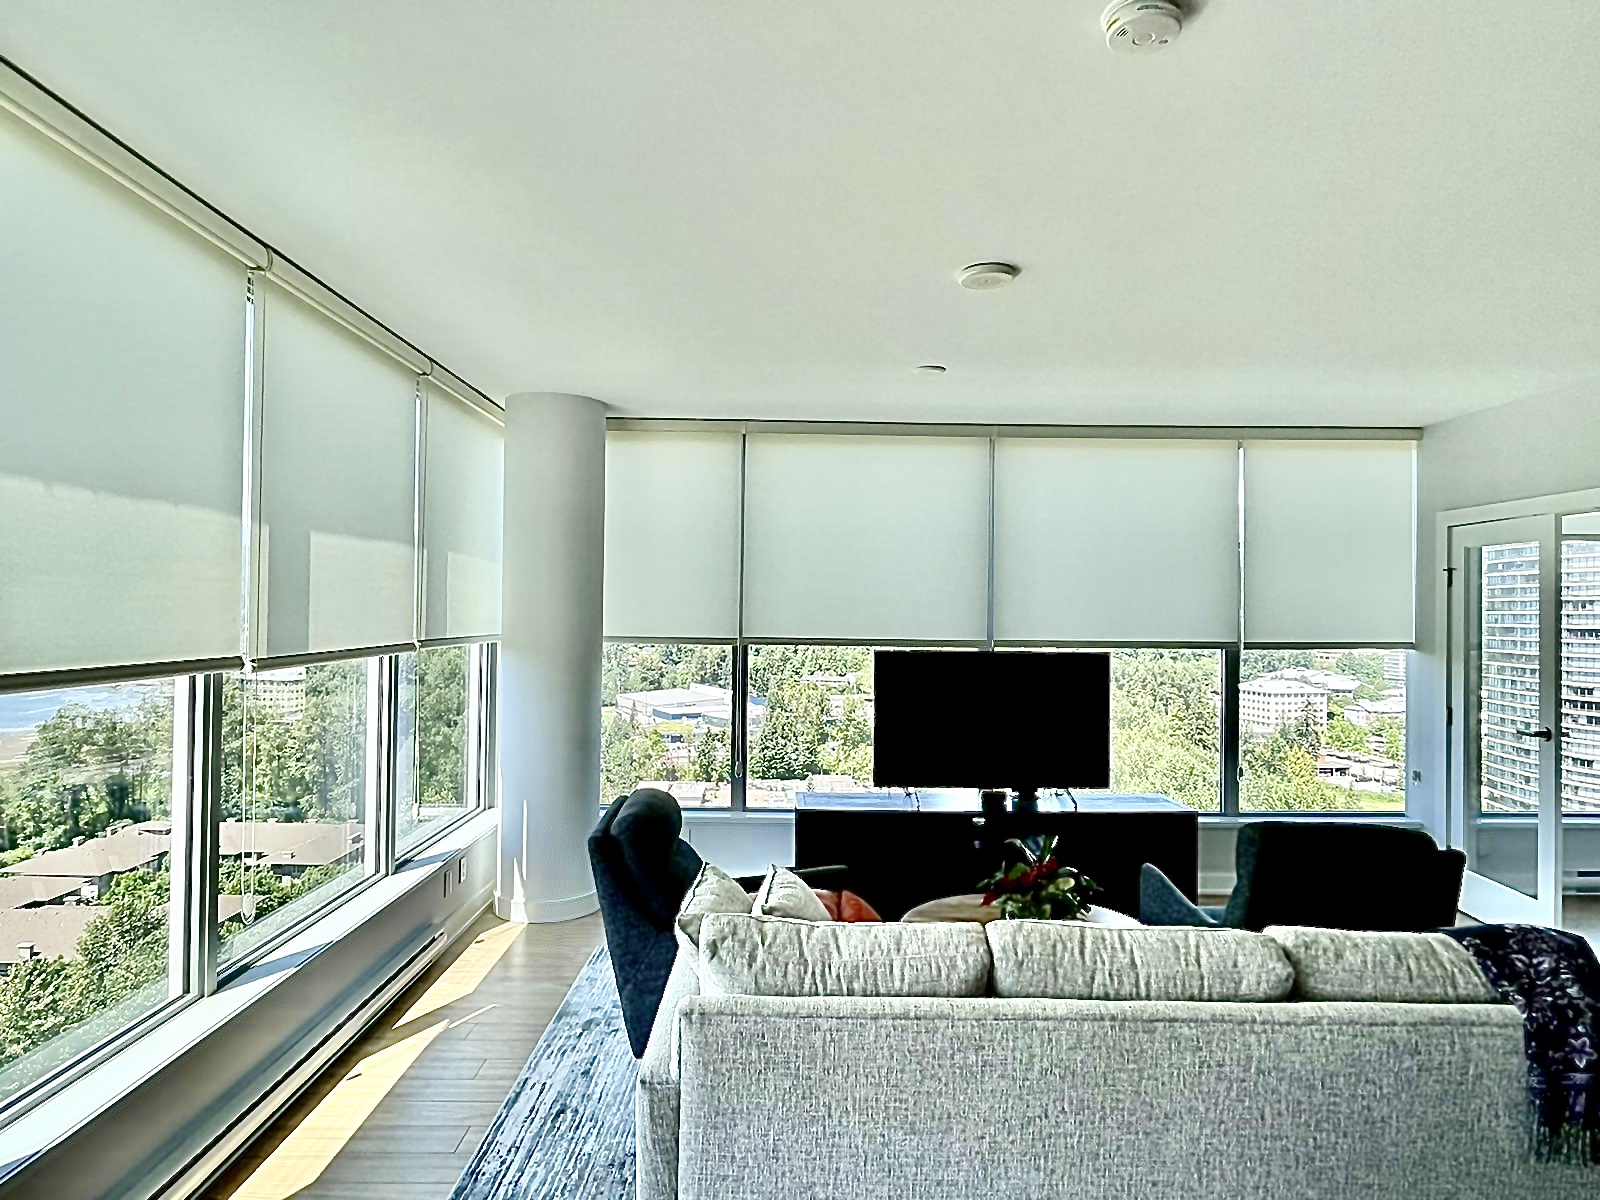 CURTAINS VS BLINDS: WHICH IS BETTER?